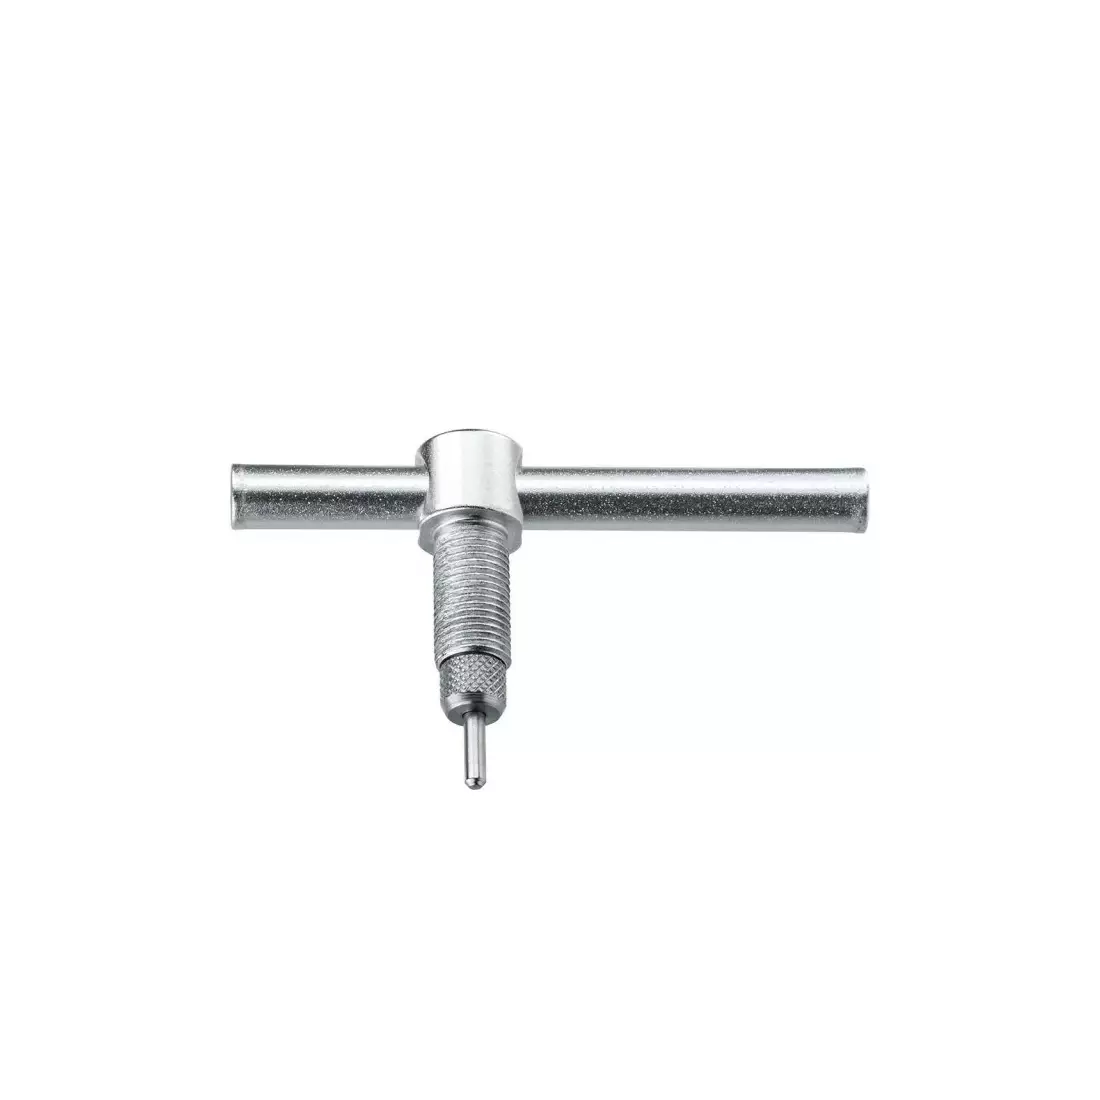 TOPEAK pin wrench for the chain smoker (All Speeds Chain Tool T-TPS-SP48) T-TRK-T092